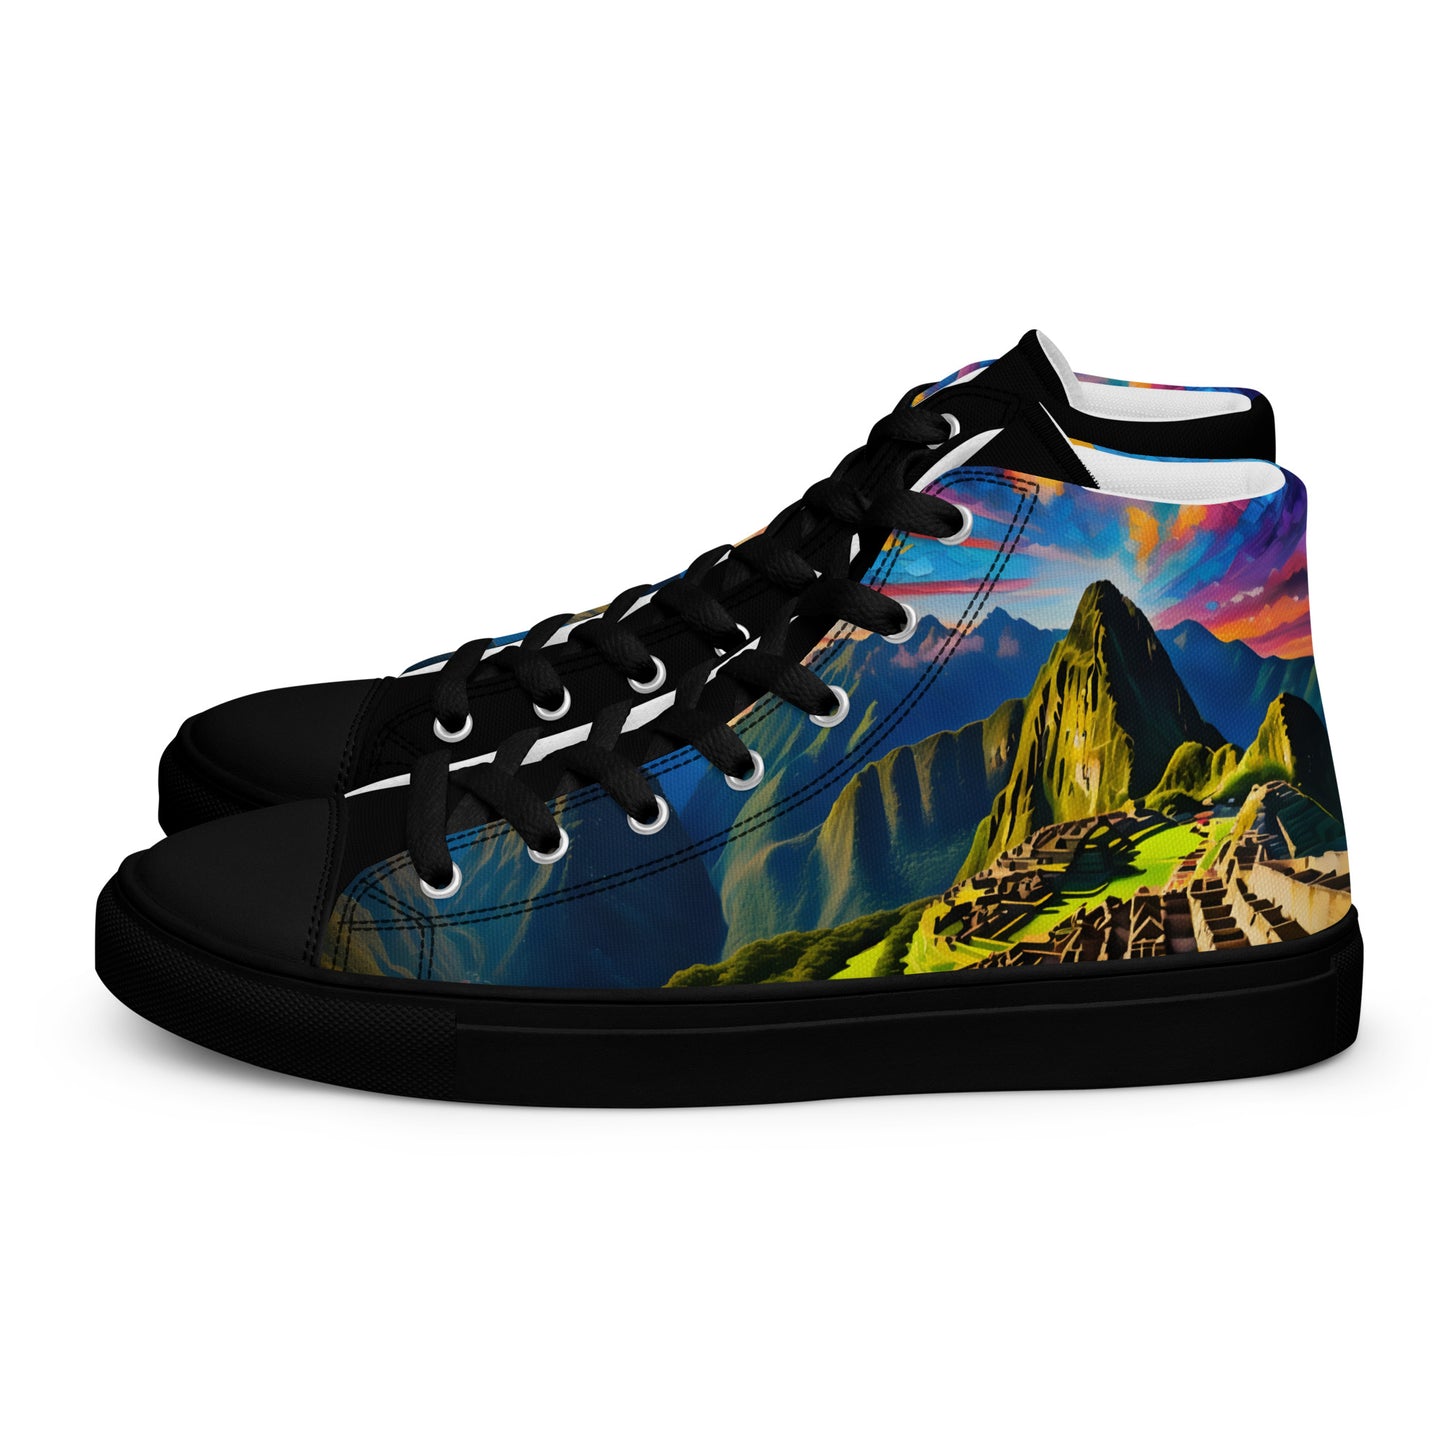 Machu Picchu - Stained glass - Men - Black - High top shoes